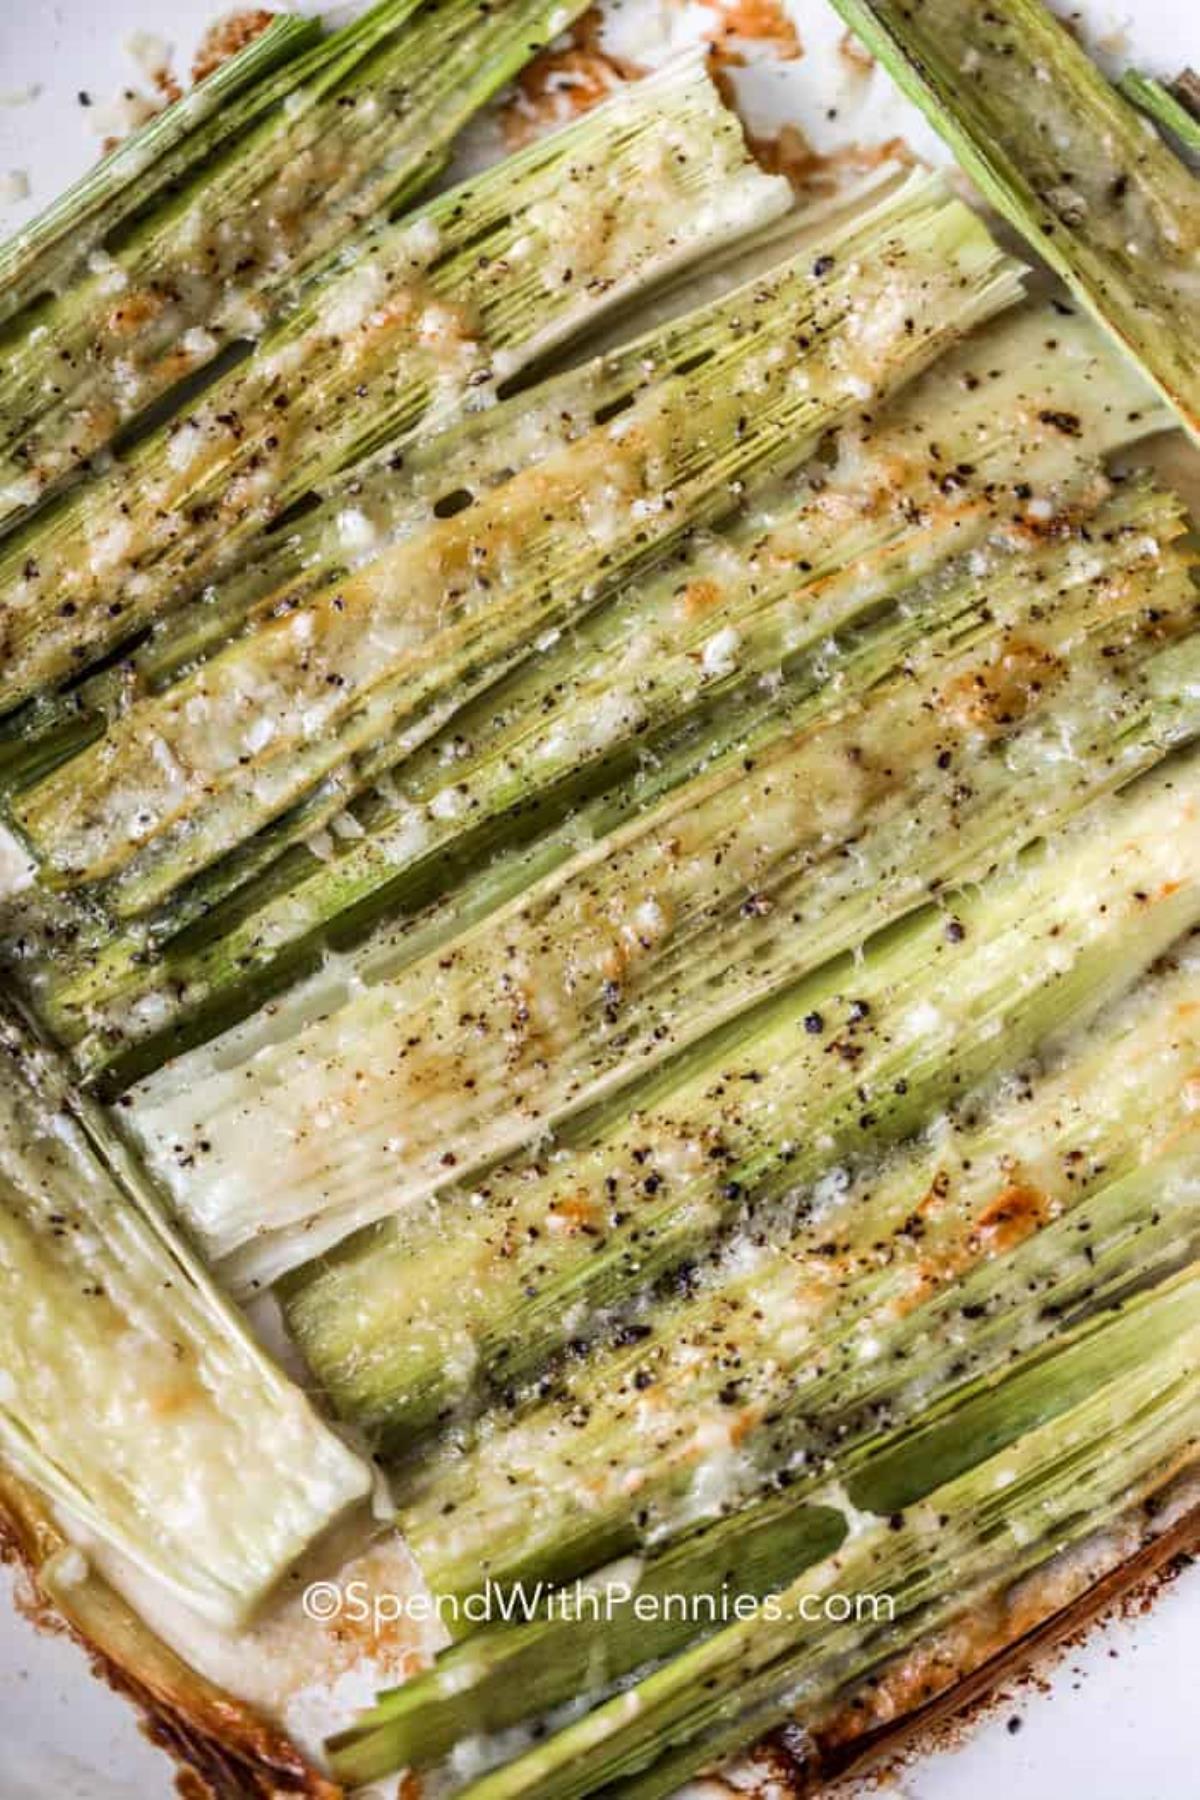 Top view of roasted leeks topped with Parmesan cheese.